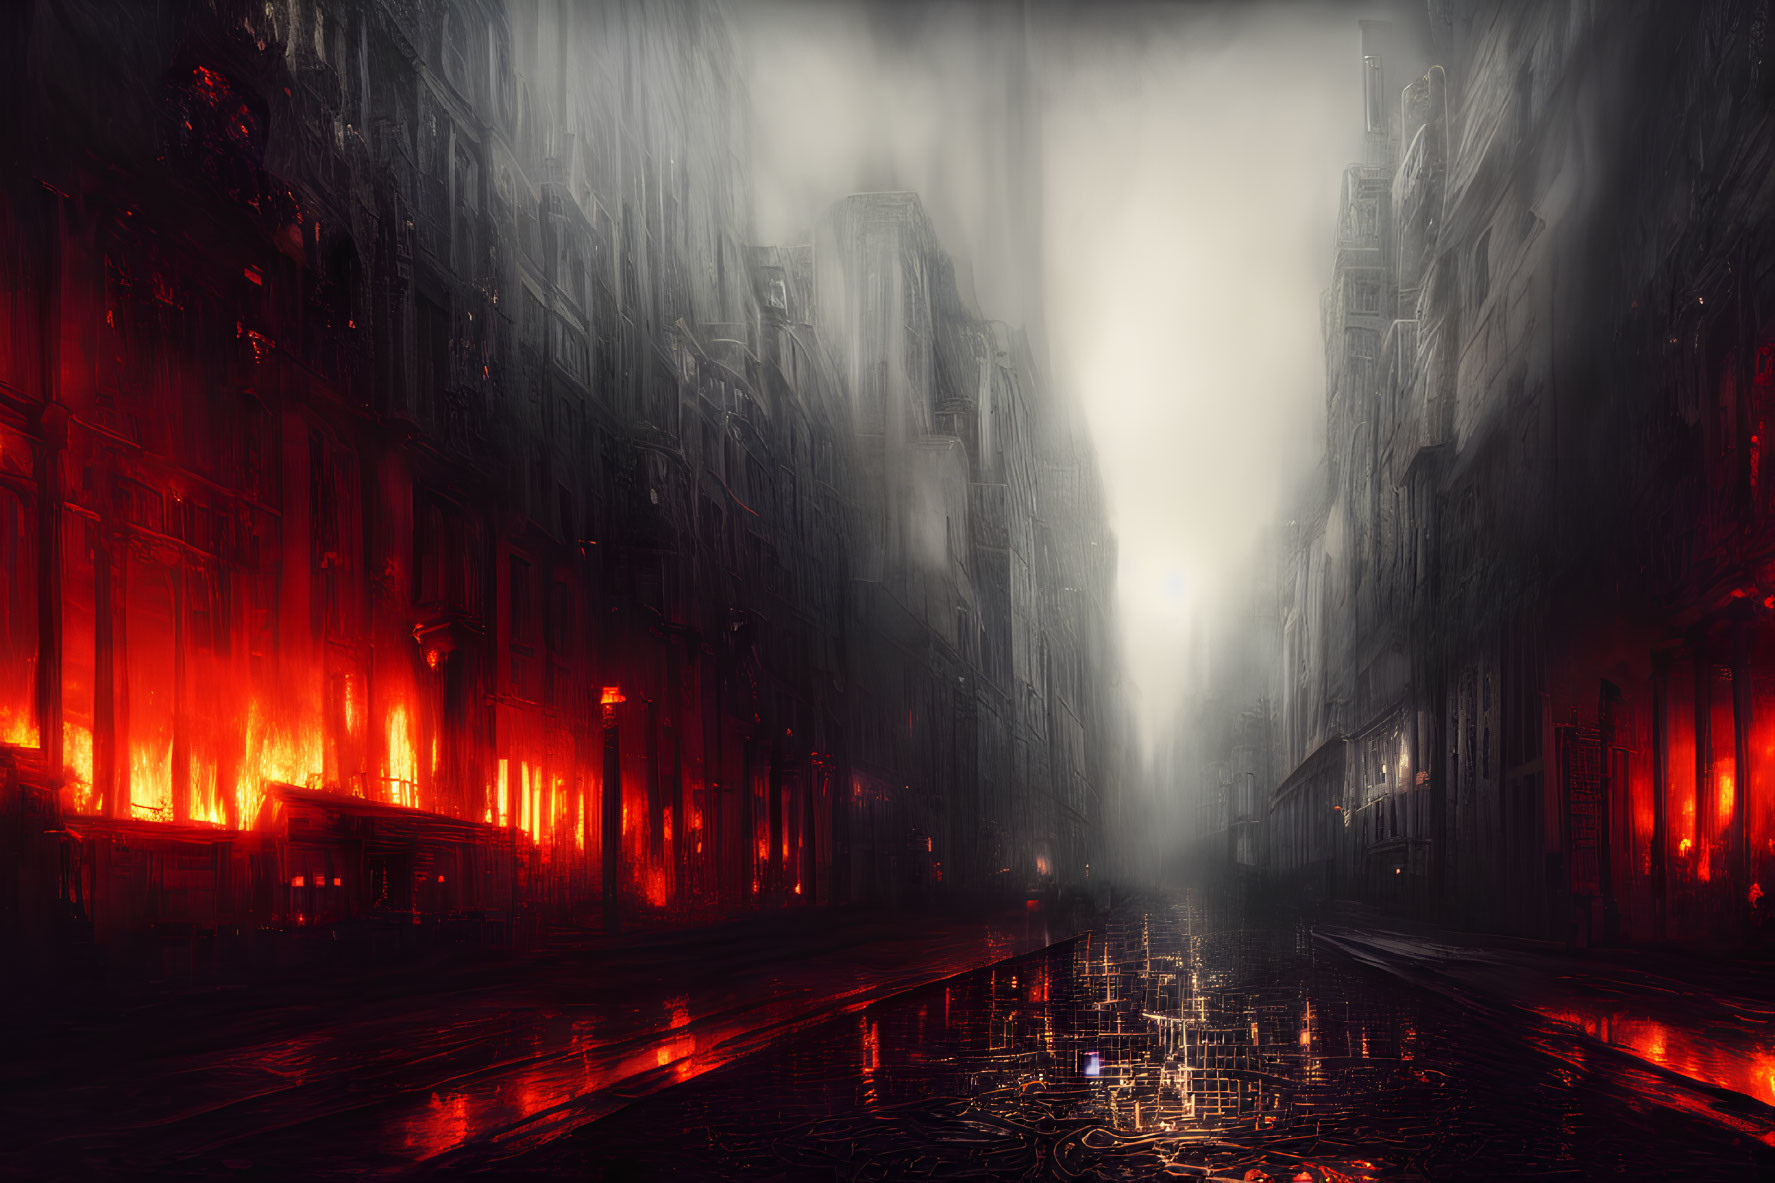 Flaming buildings and misty street scene with reflective cobblestones